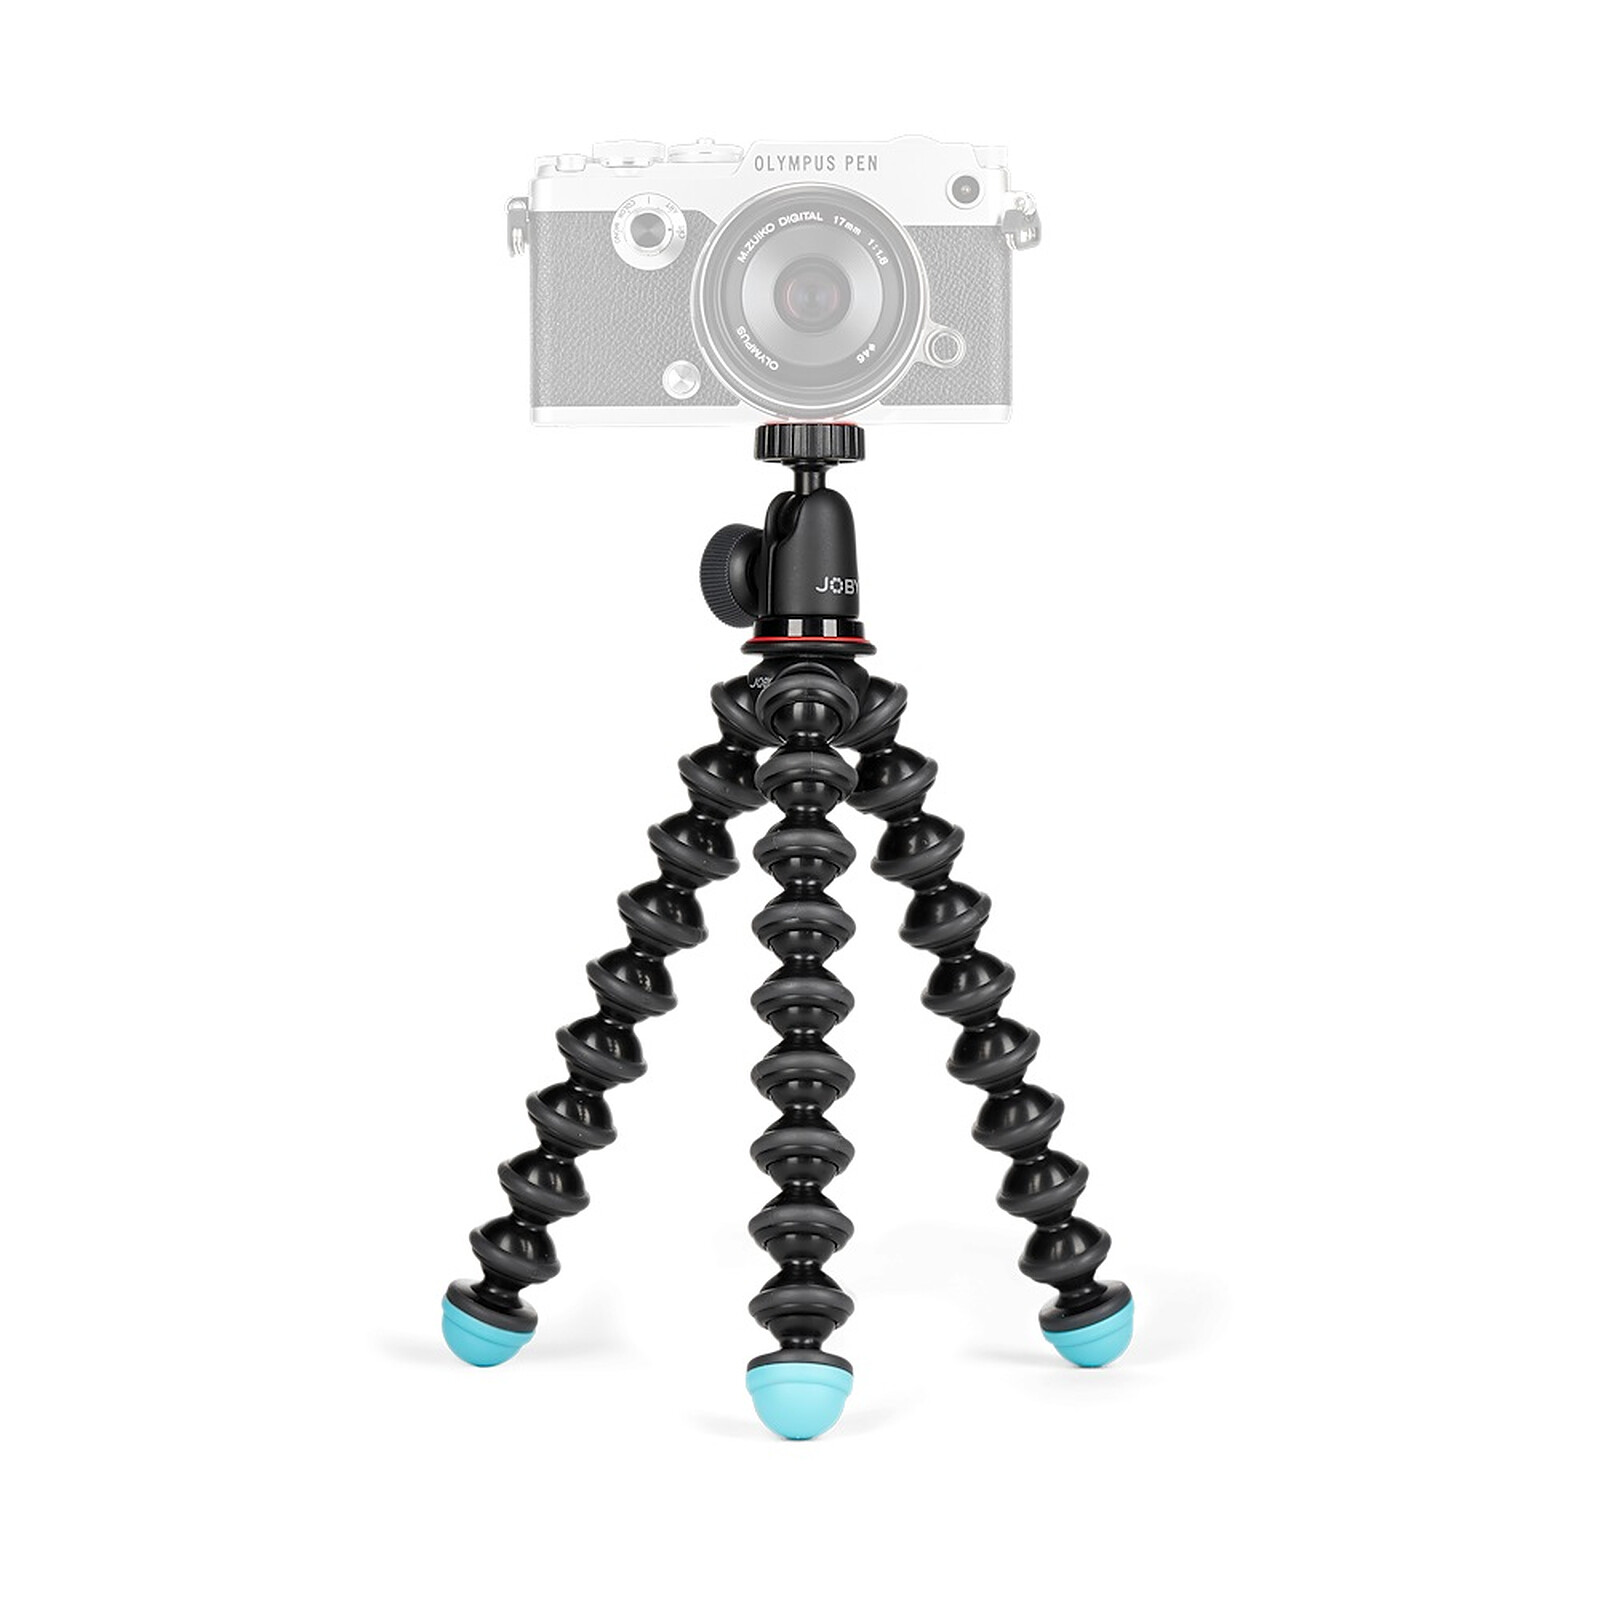 Must-Have Camera Accessories for Beginners - 42West